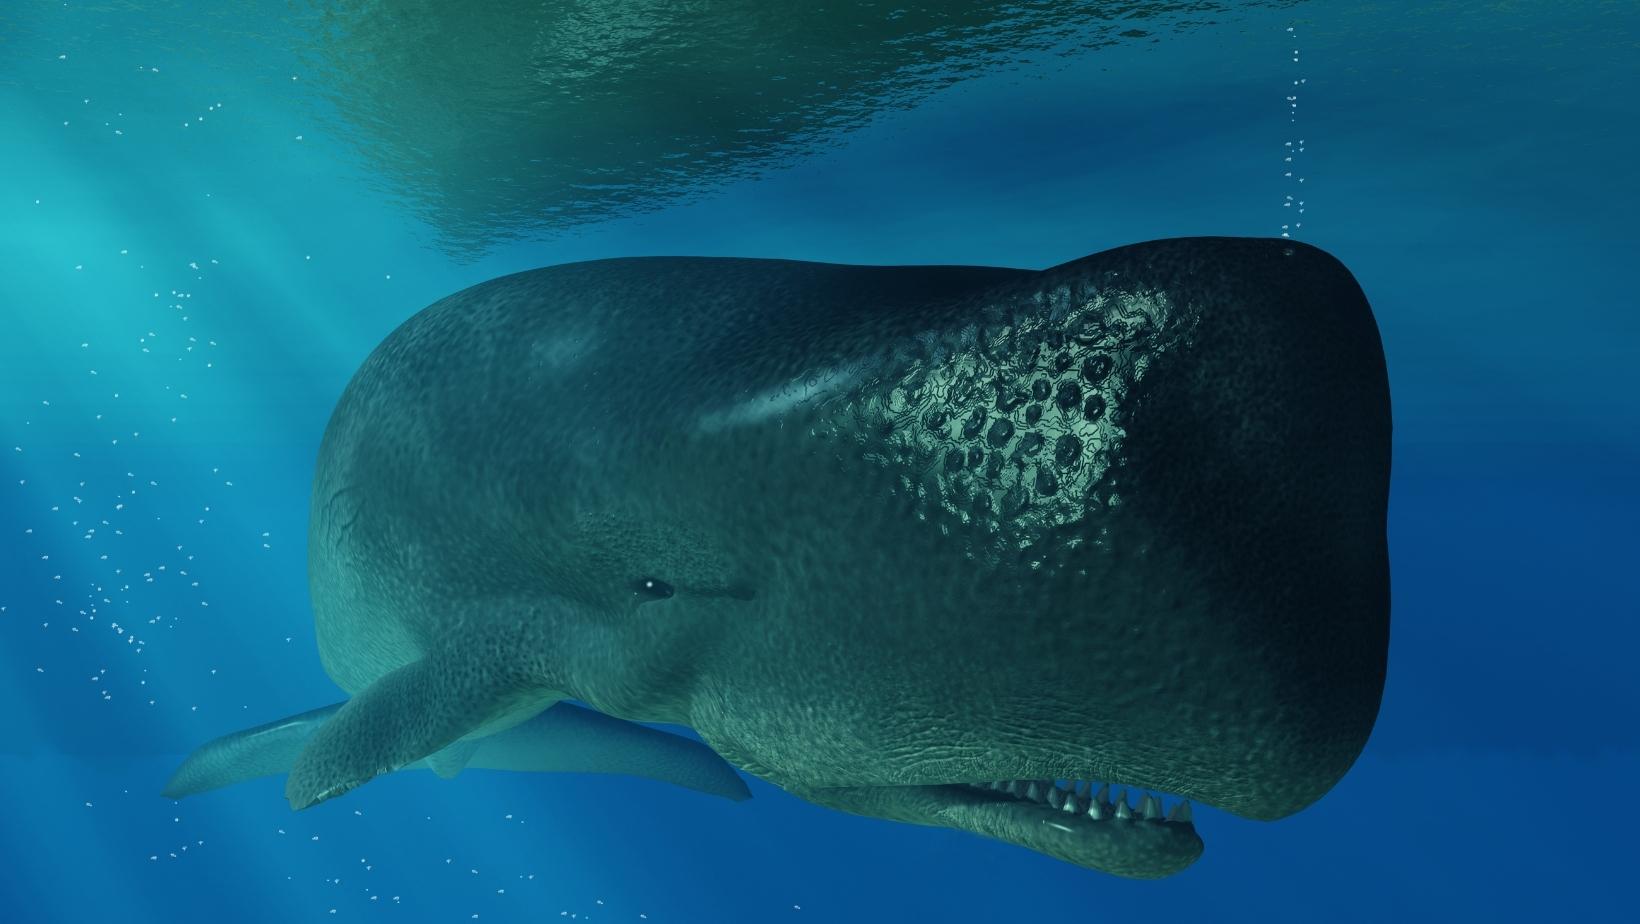 Interesting facts about sperm whales